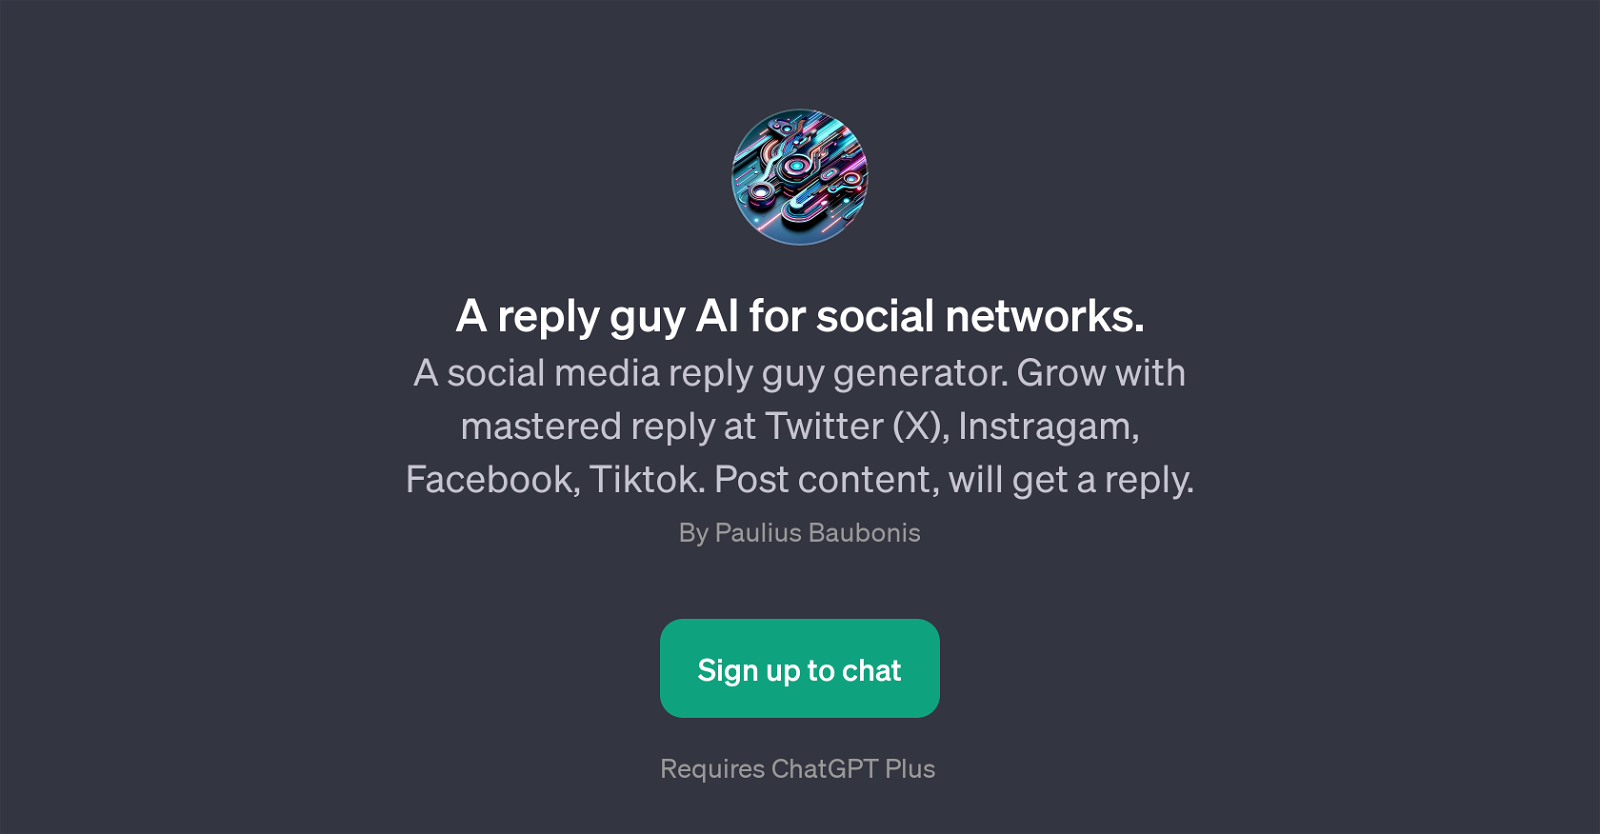 A reply guy AI for social networks website